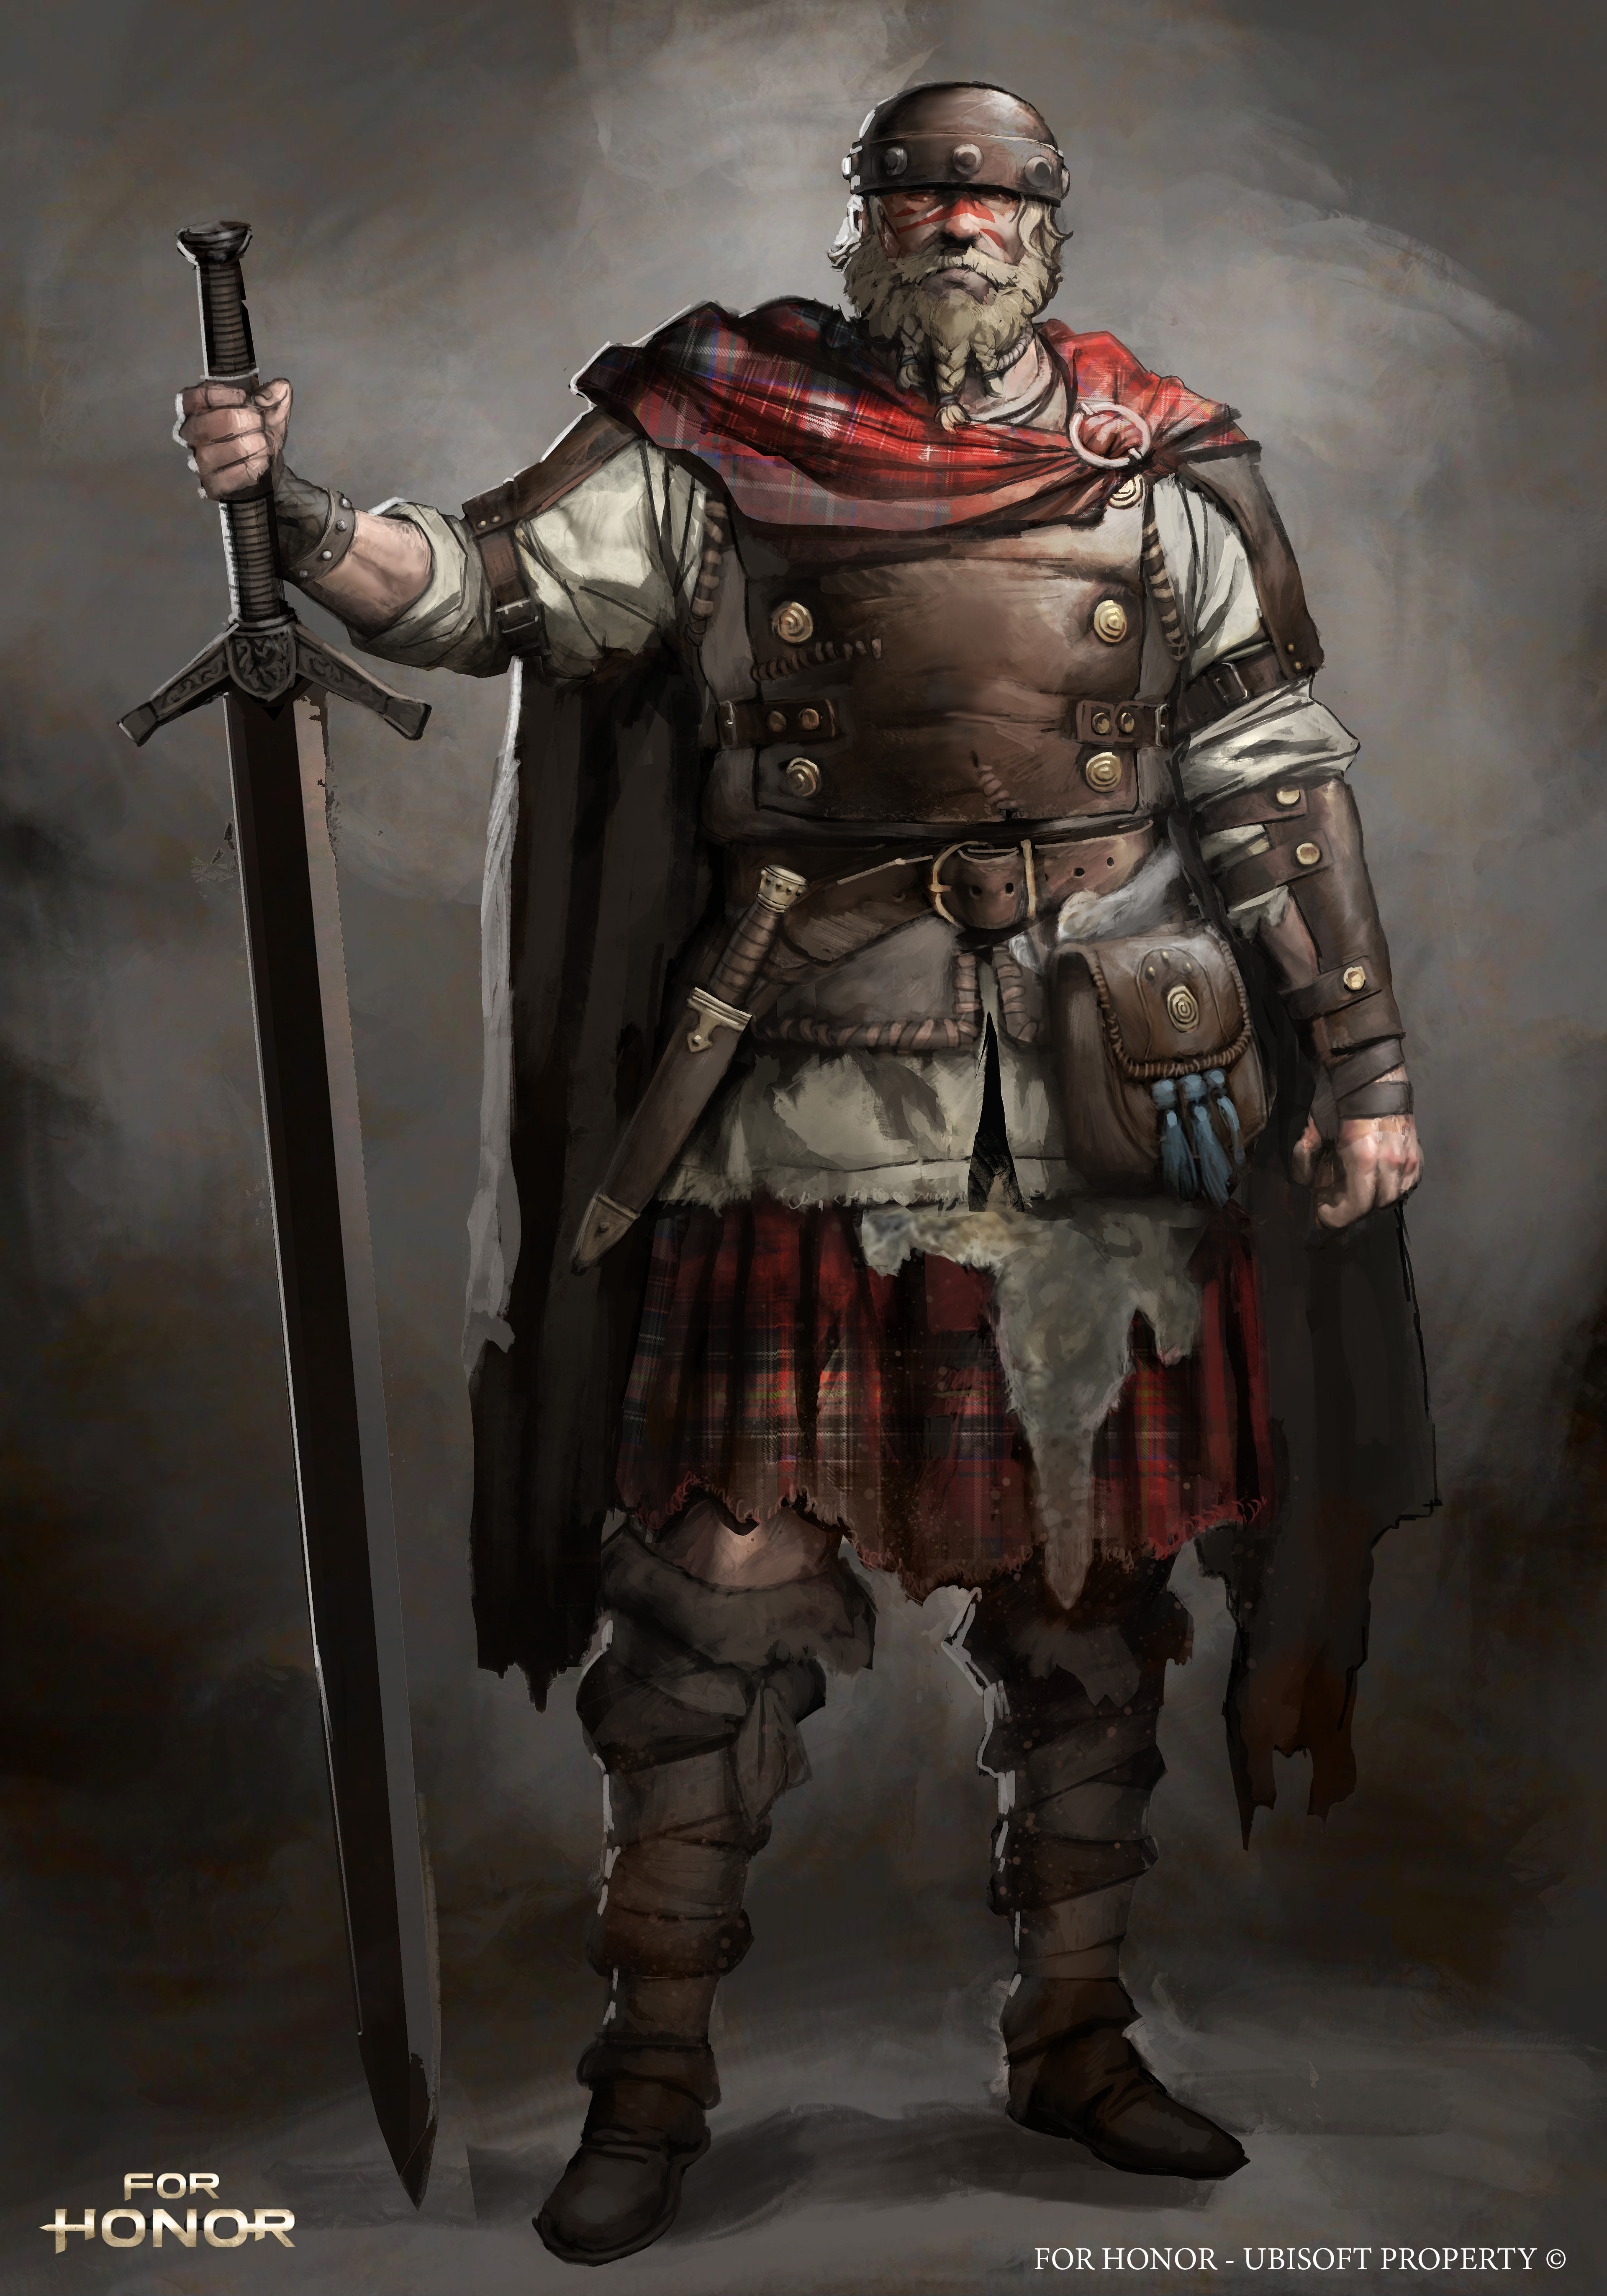 For Honor - Highlander character concept.